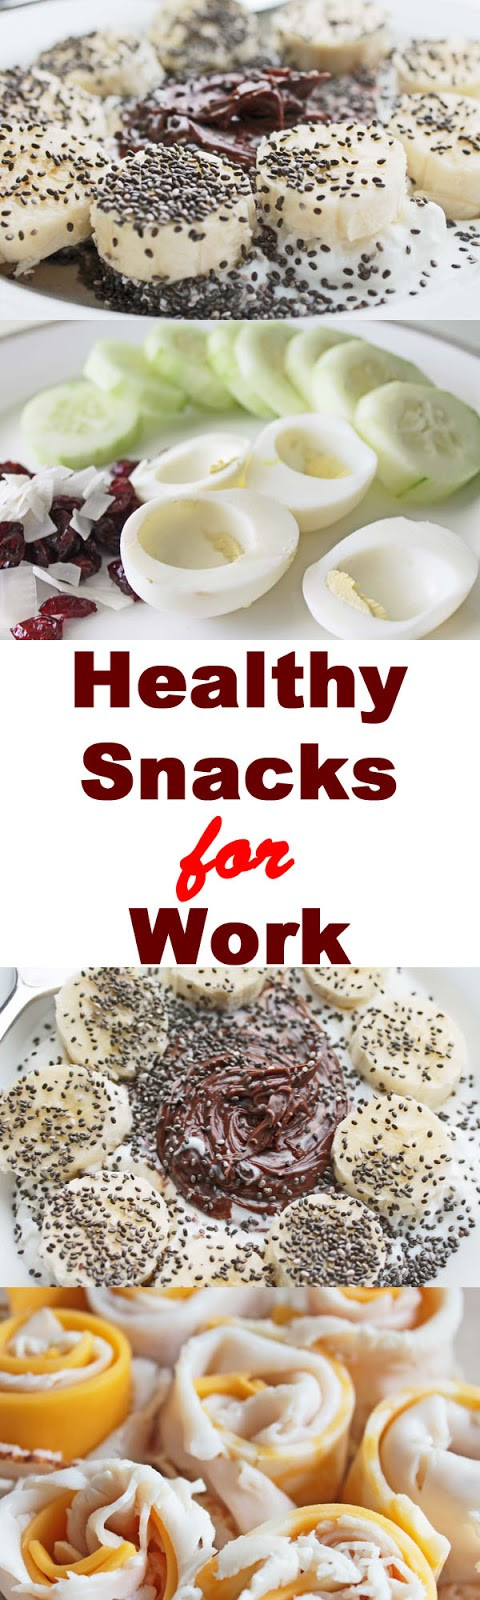 Cheap Healthy Snacks For Work
 Healthy Snacks for Work Daily Re mendations 13